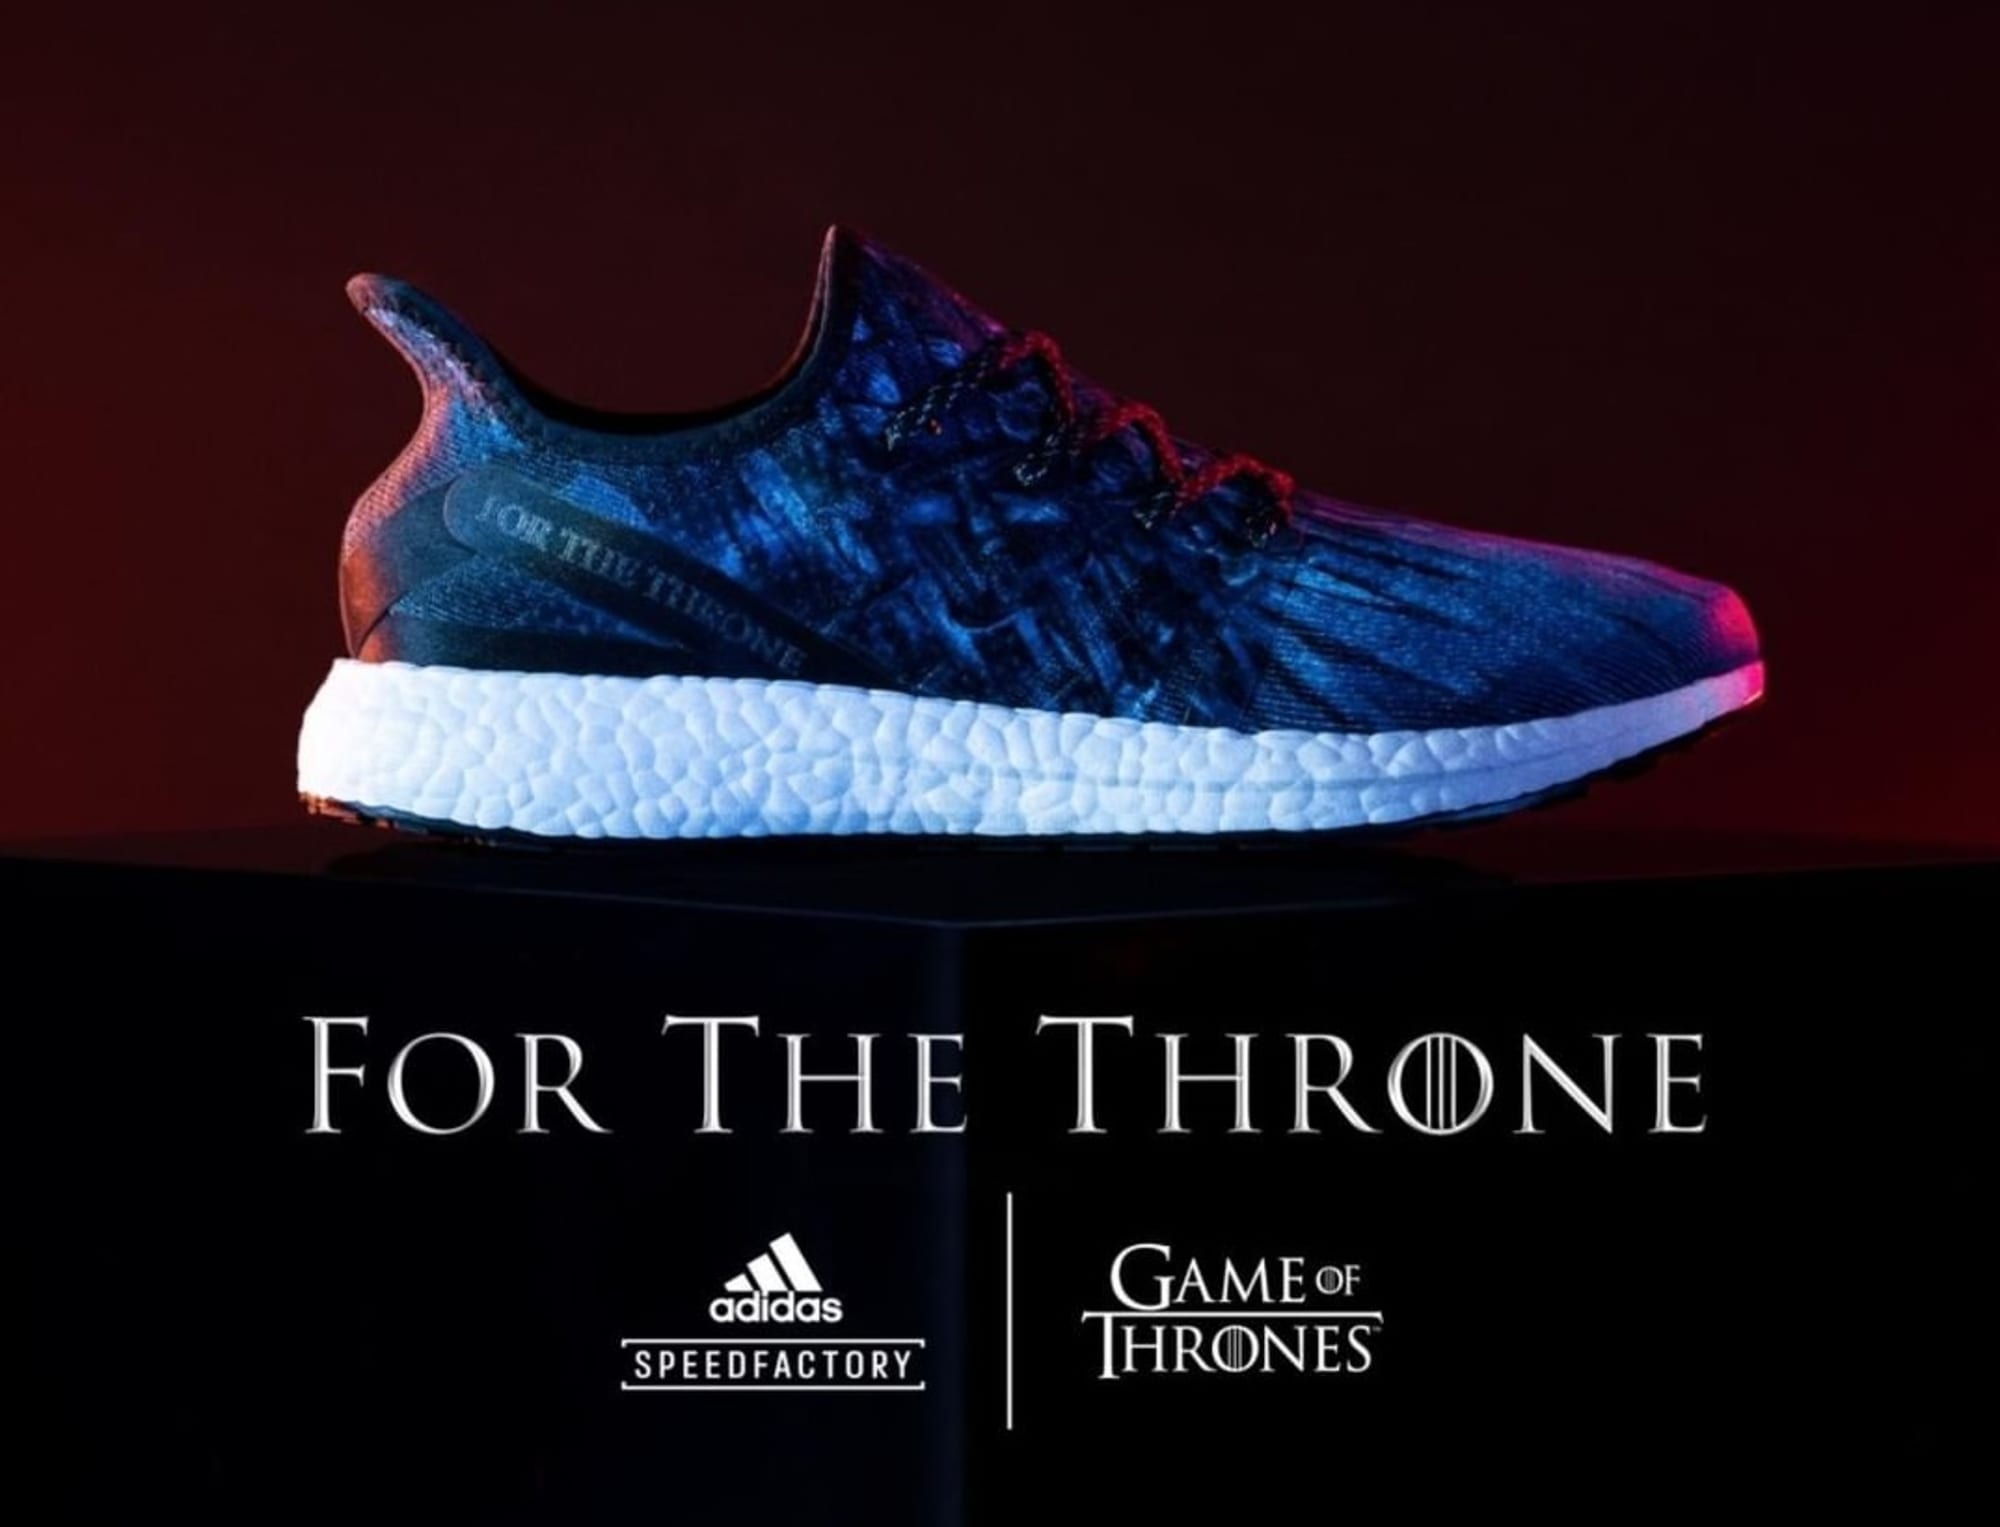 games of thrones shoes